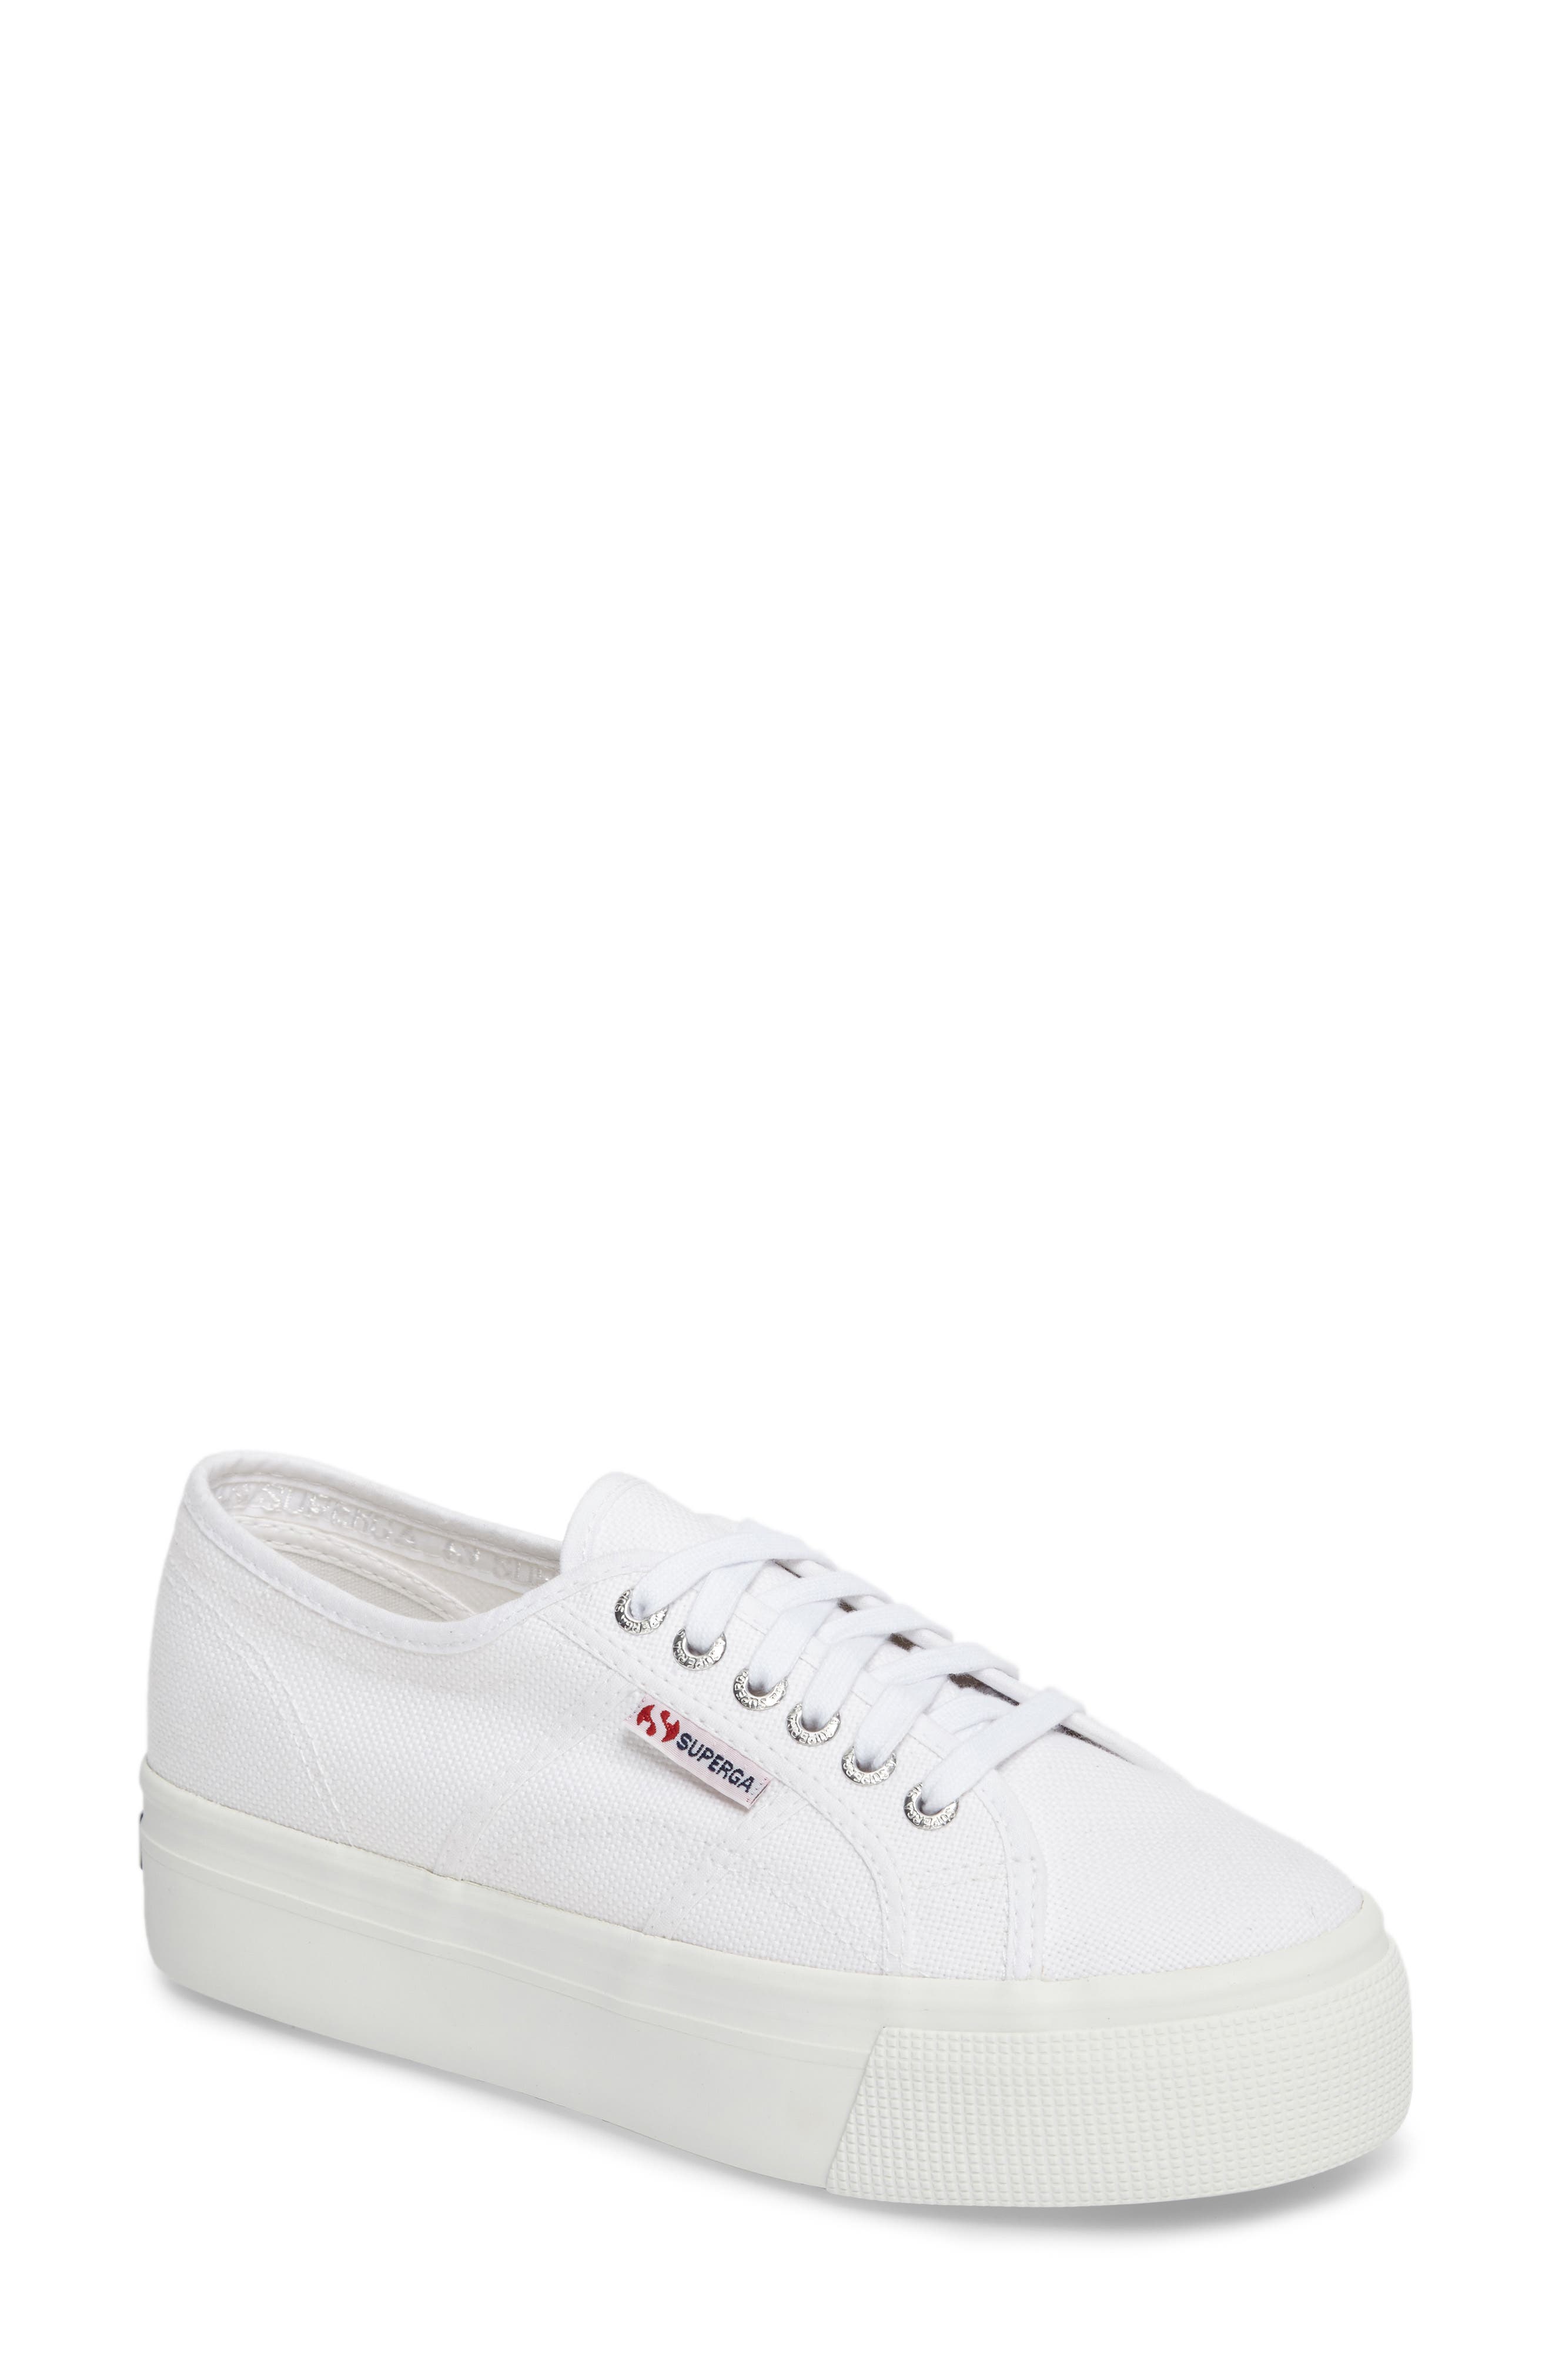 Superga Womens Low Trainers